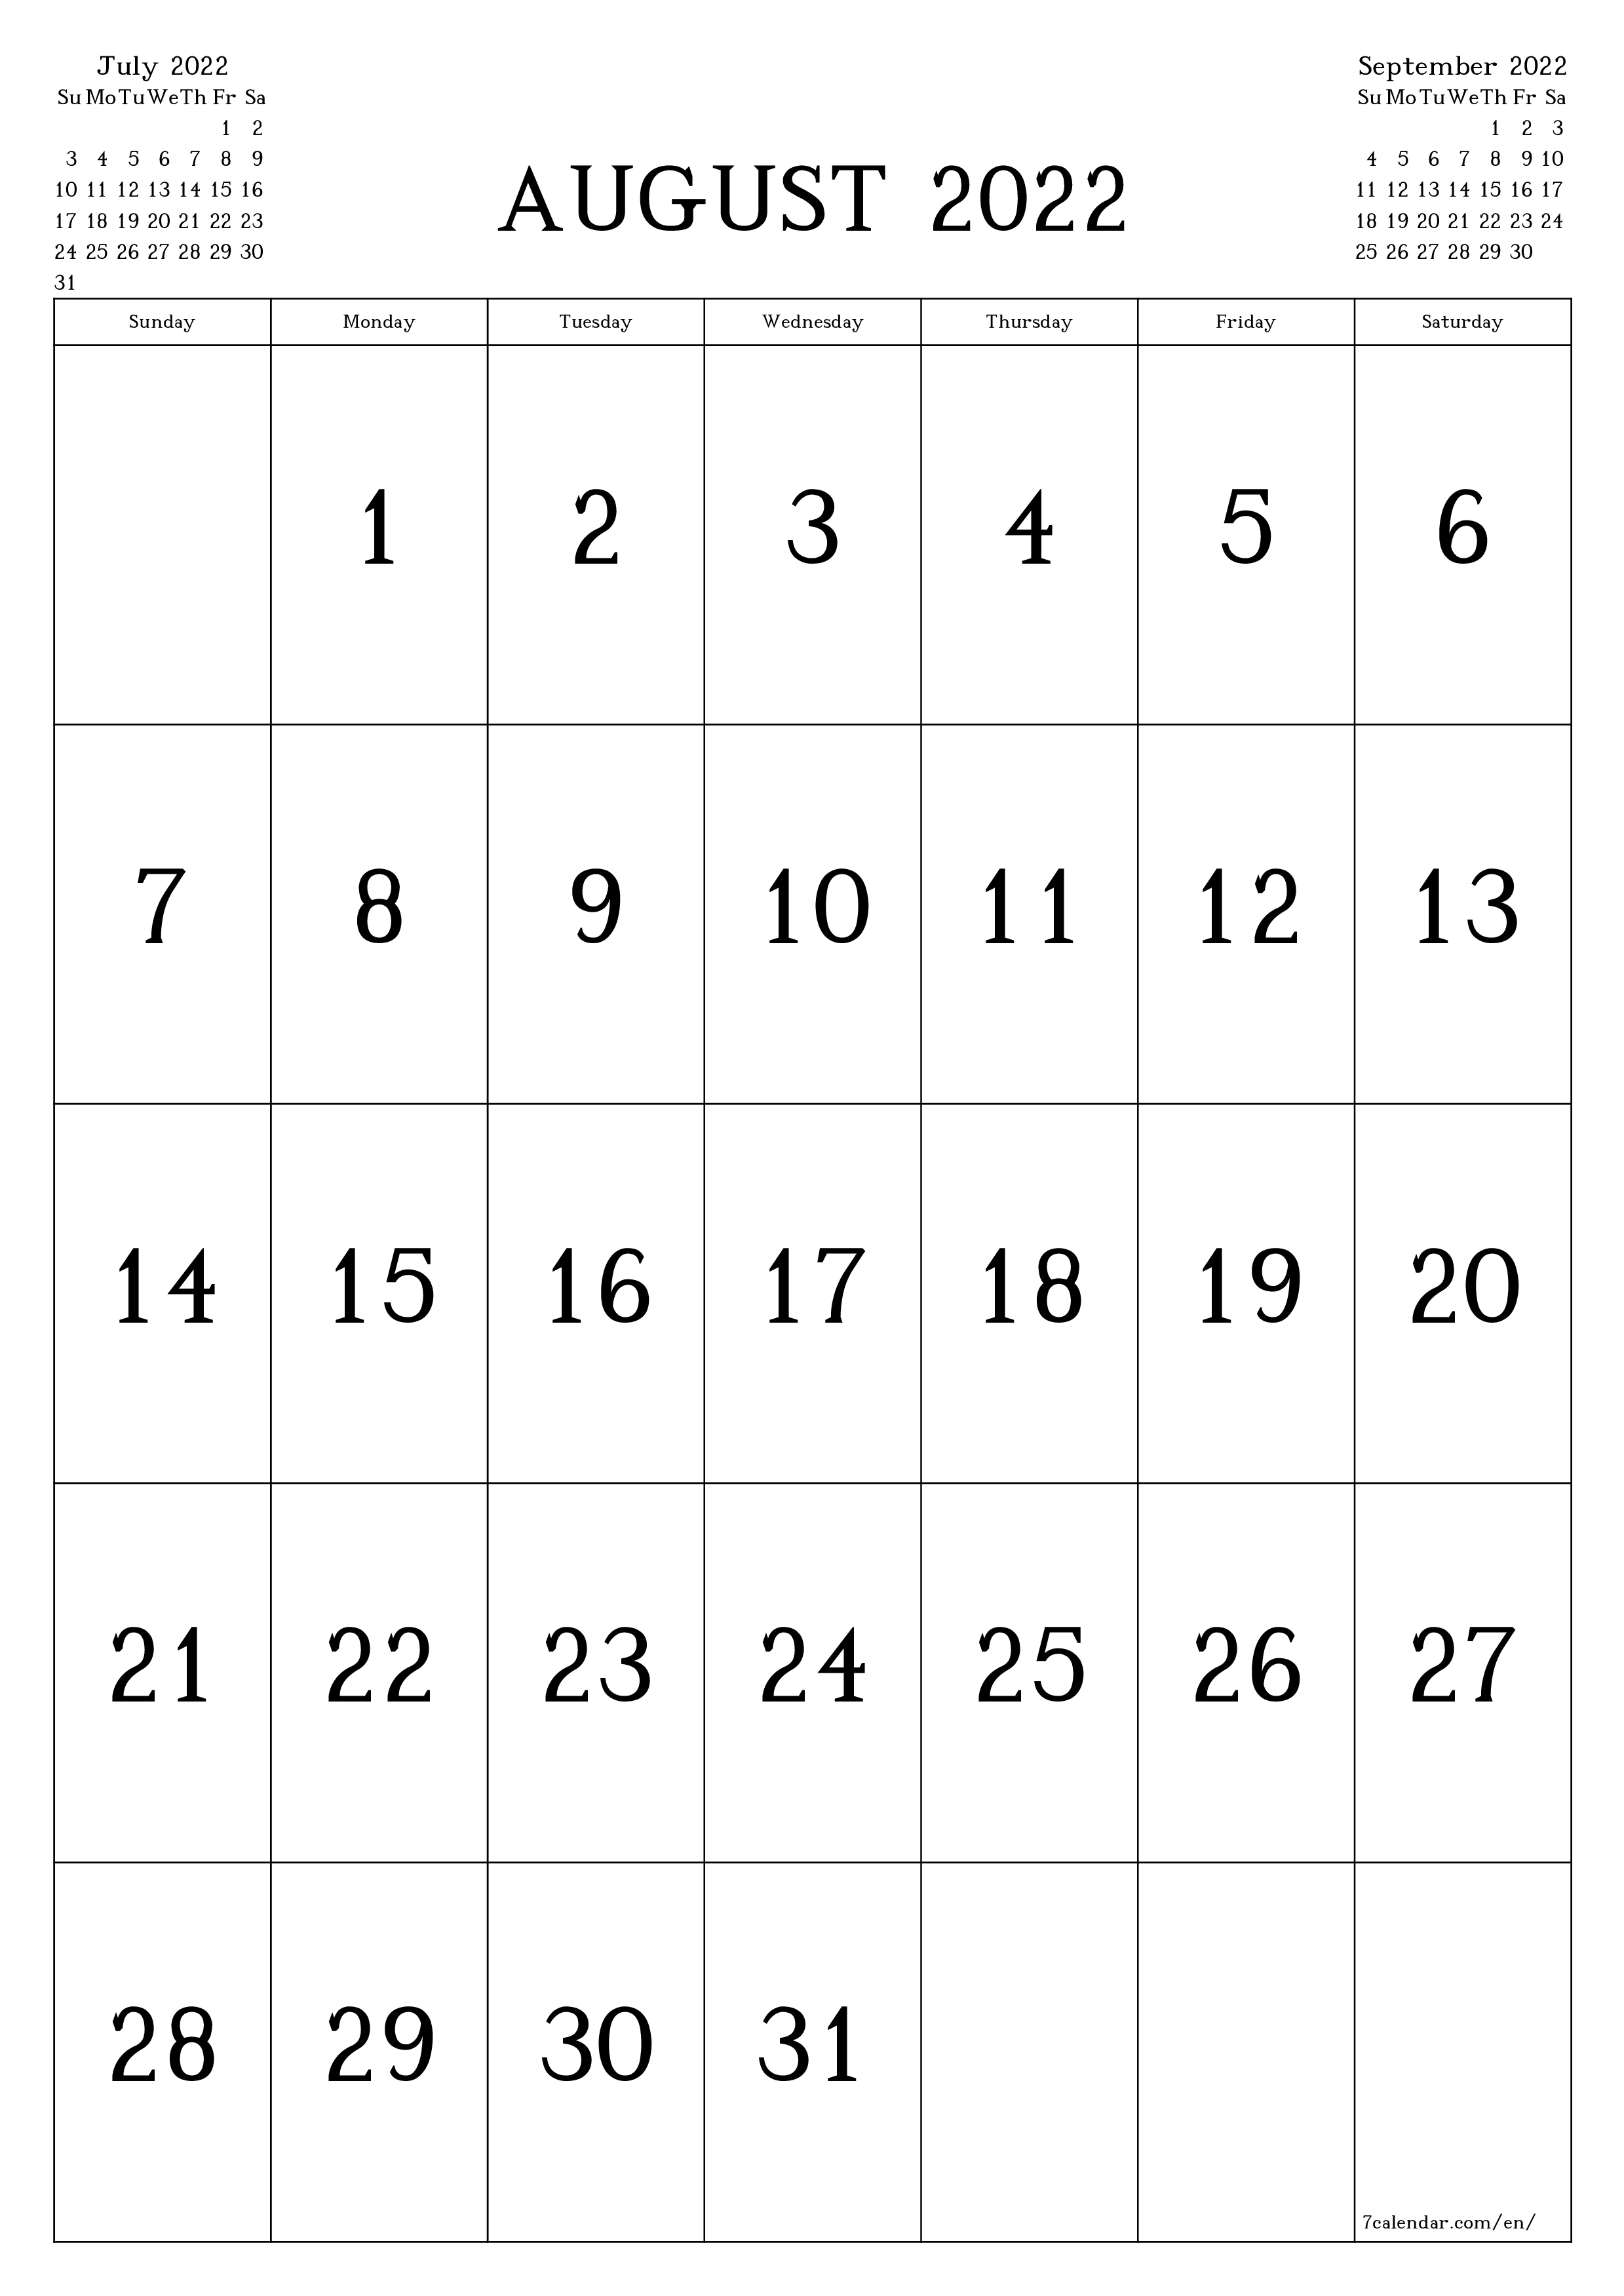 Blank monthly dated HD template image of calendar for month August 2022 save and print to PDF PNG English - 7calendar.com